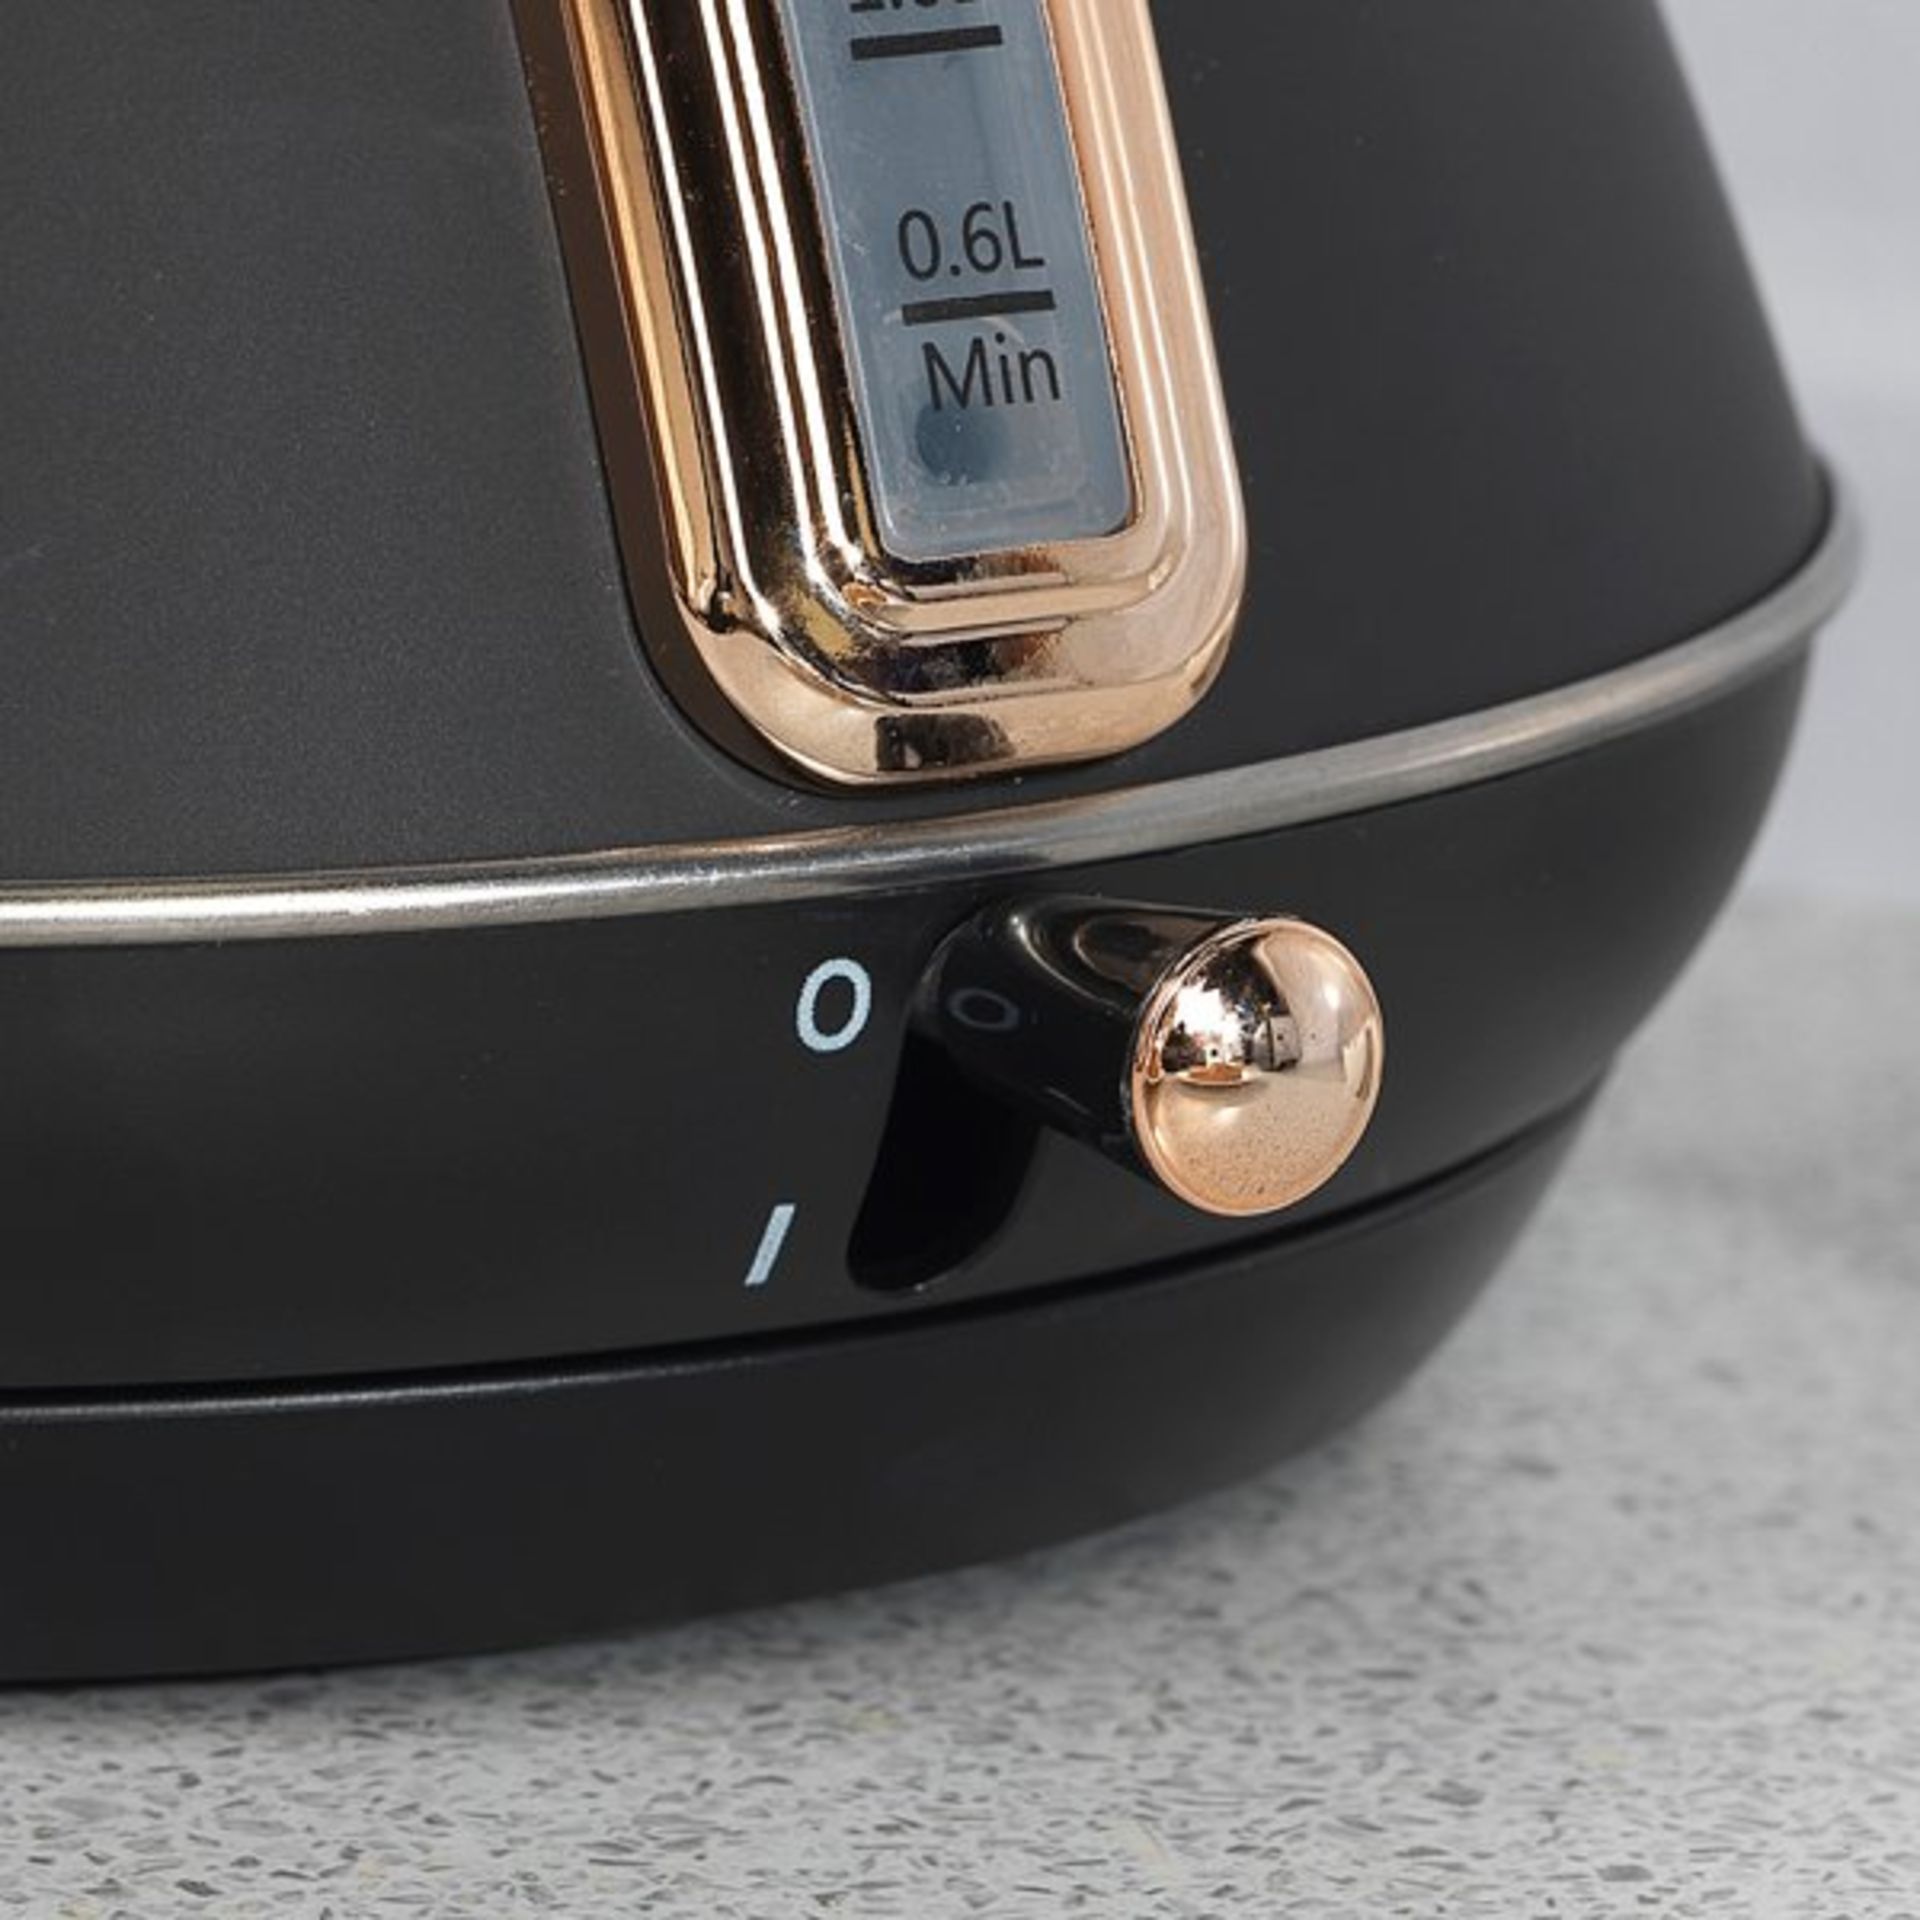 Brand New Salter Rose Gold Pyramid Kettle - Image 2 of 2